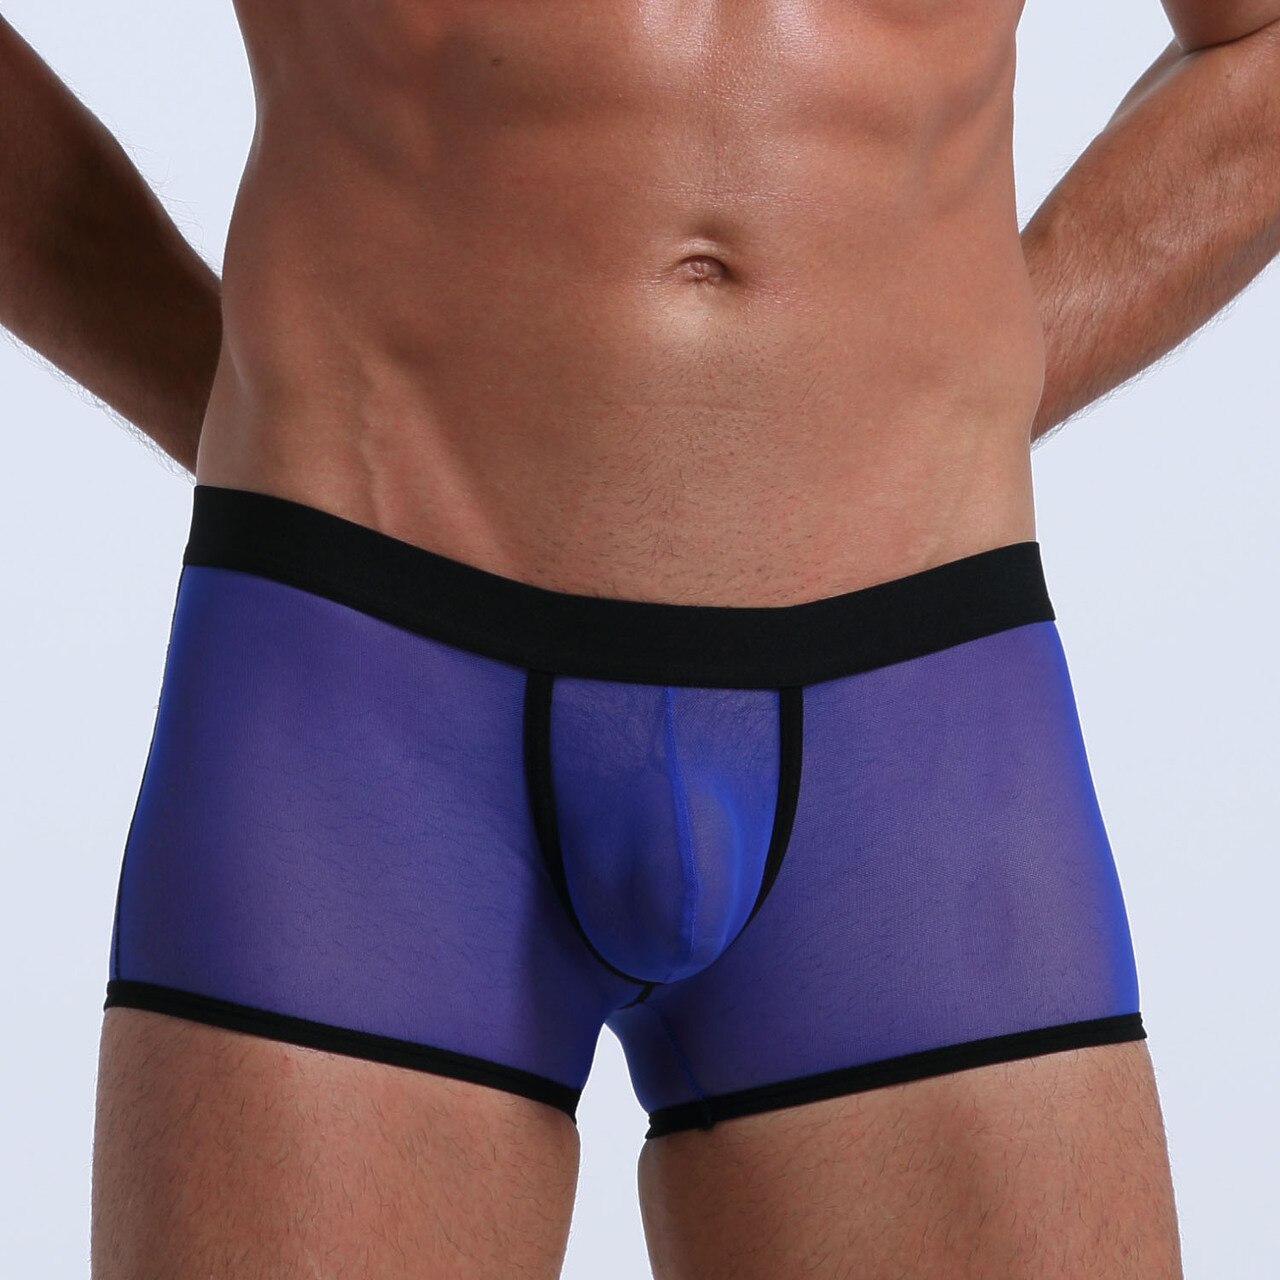 Mens Stretch Mesh Sheer Boxer Briefs with Pouch Front Blue